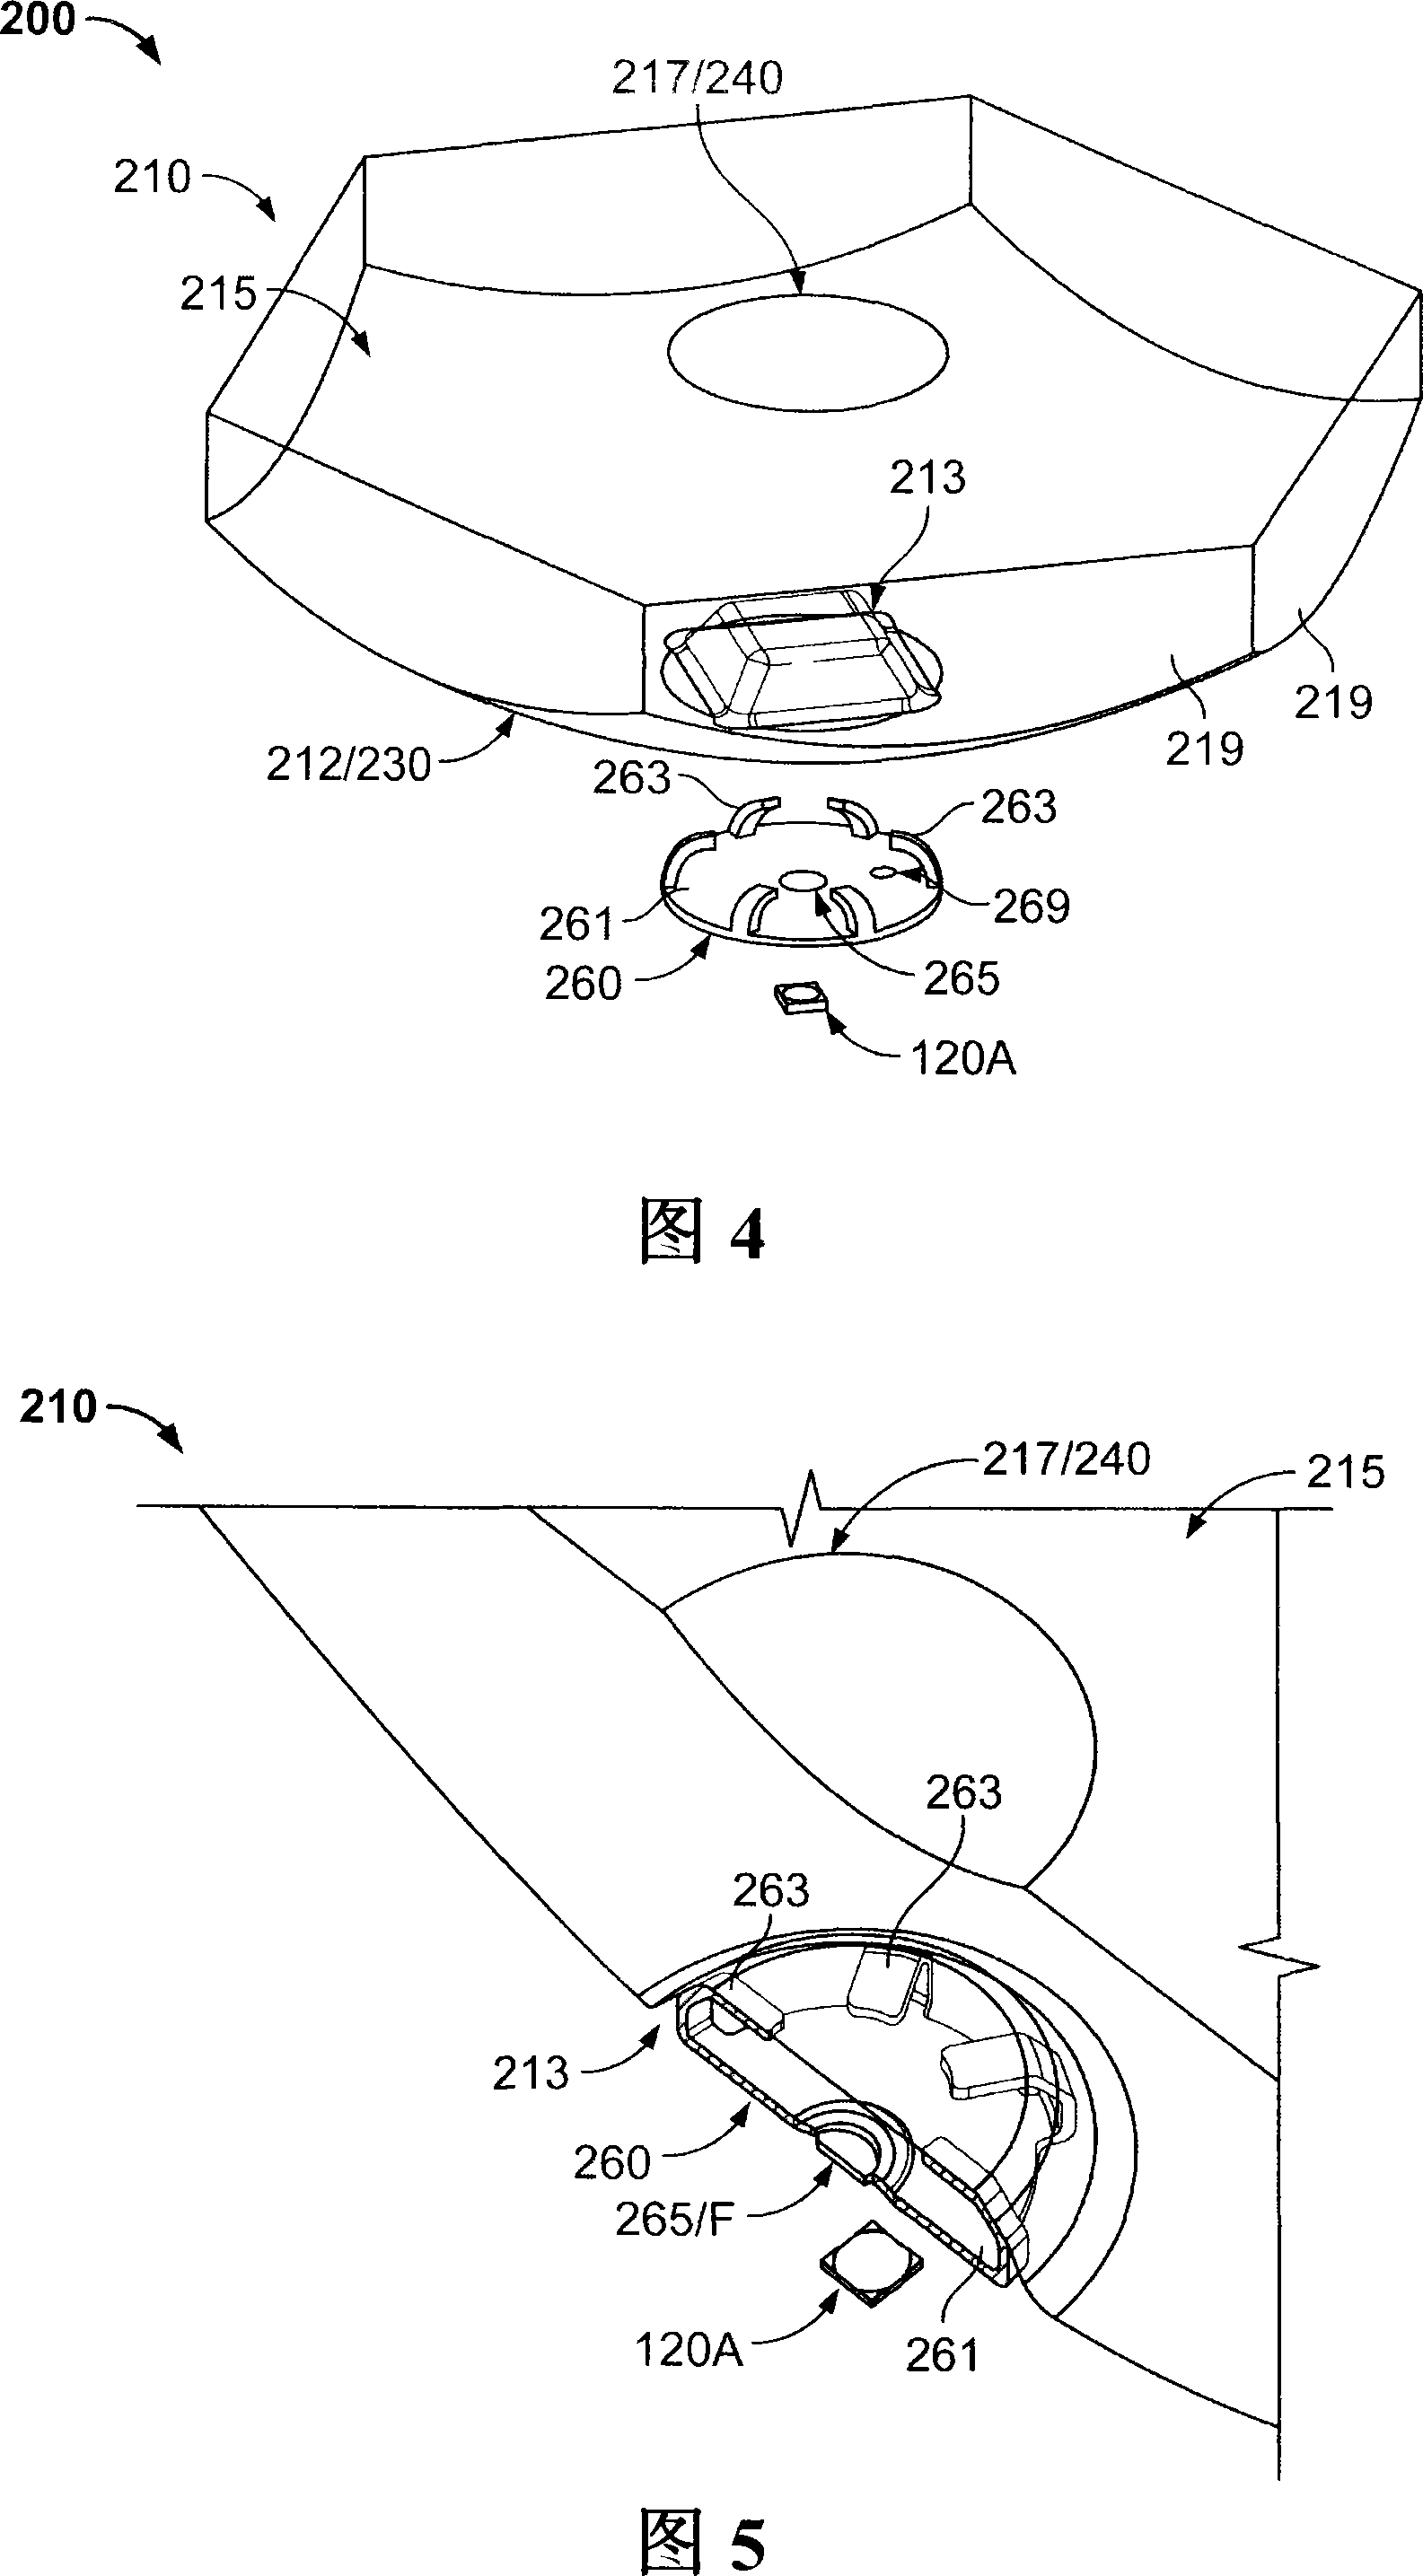 Solar concentrating photovoltaic device with resilient cell package assembly